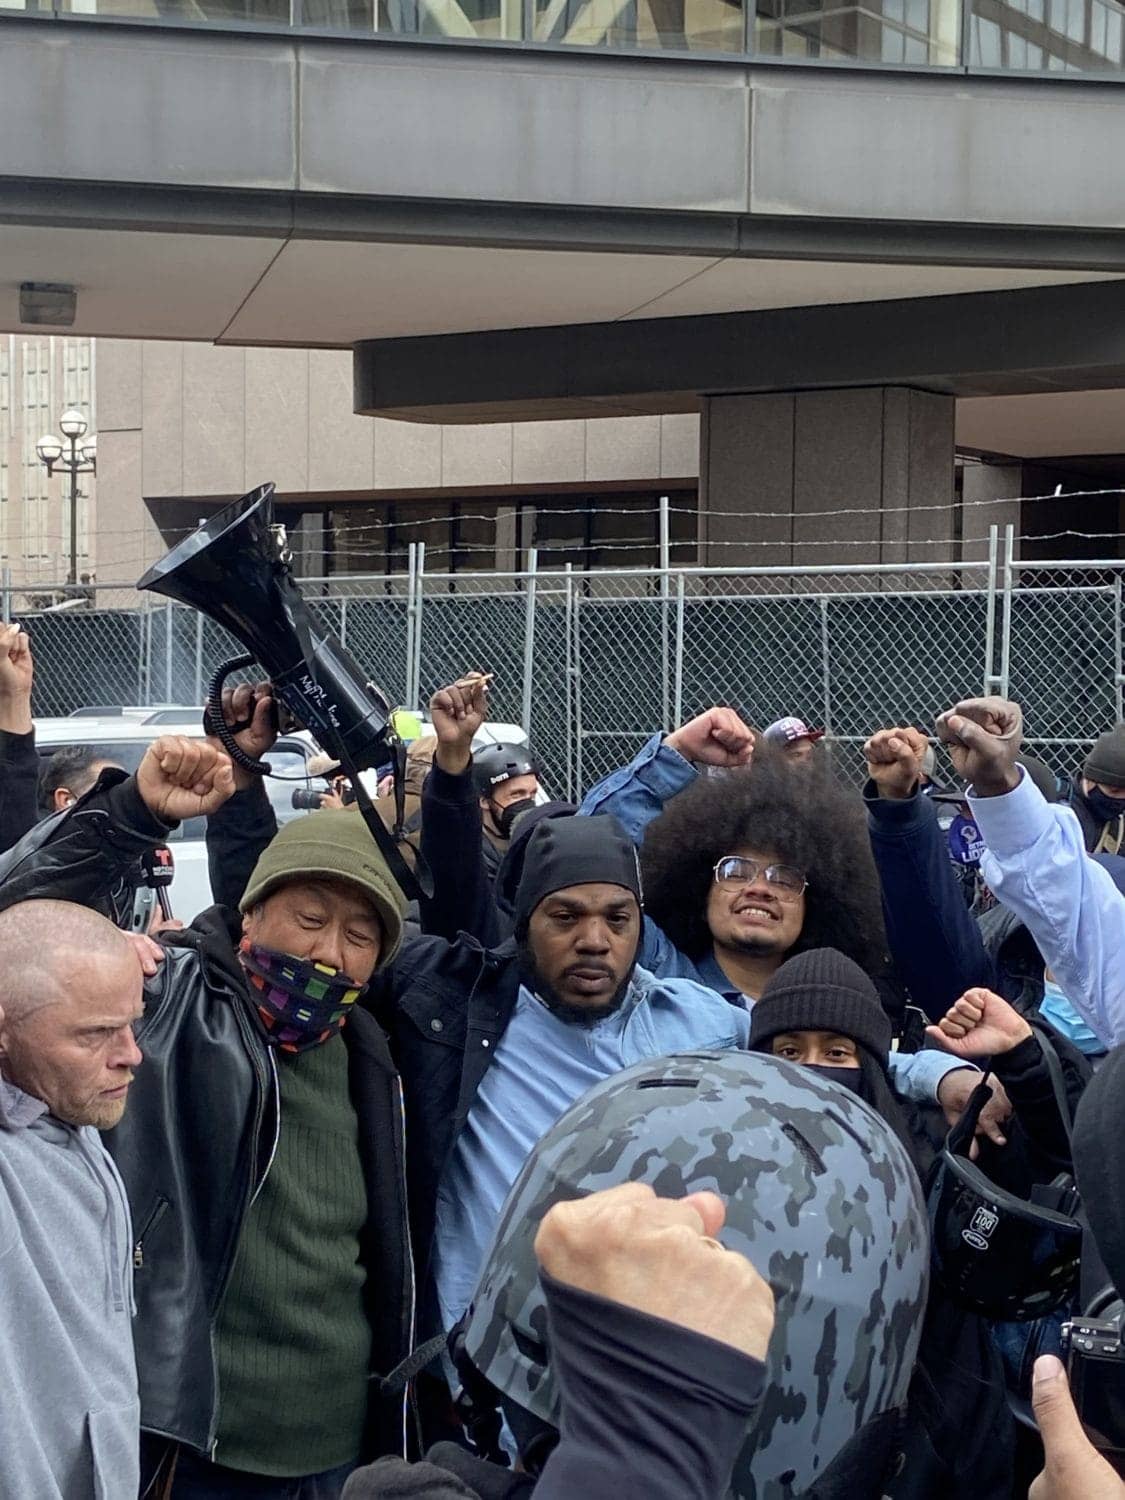 Hanson-Lee-in-Minneapolis-crowd-outside-courthouse-exult-after-Derek-Chauvin-verdict-042021-by-Joan-Stratis, Derek Chauvin: This verdict is not about ‘justice’ or ‘accountability’, News & Views 